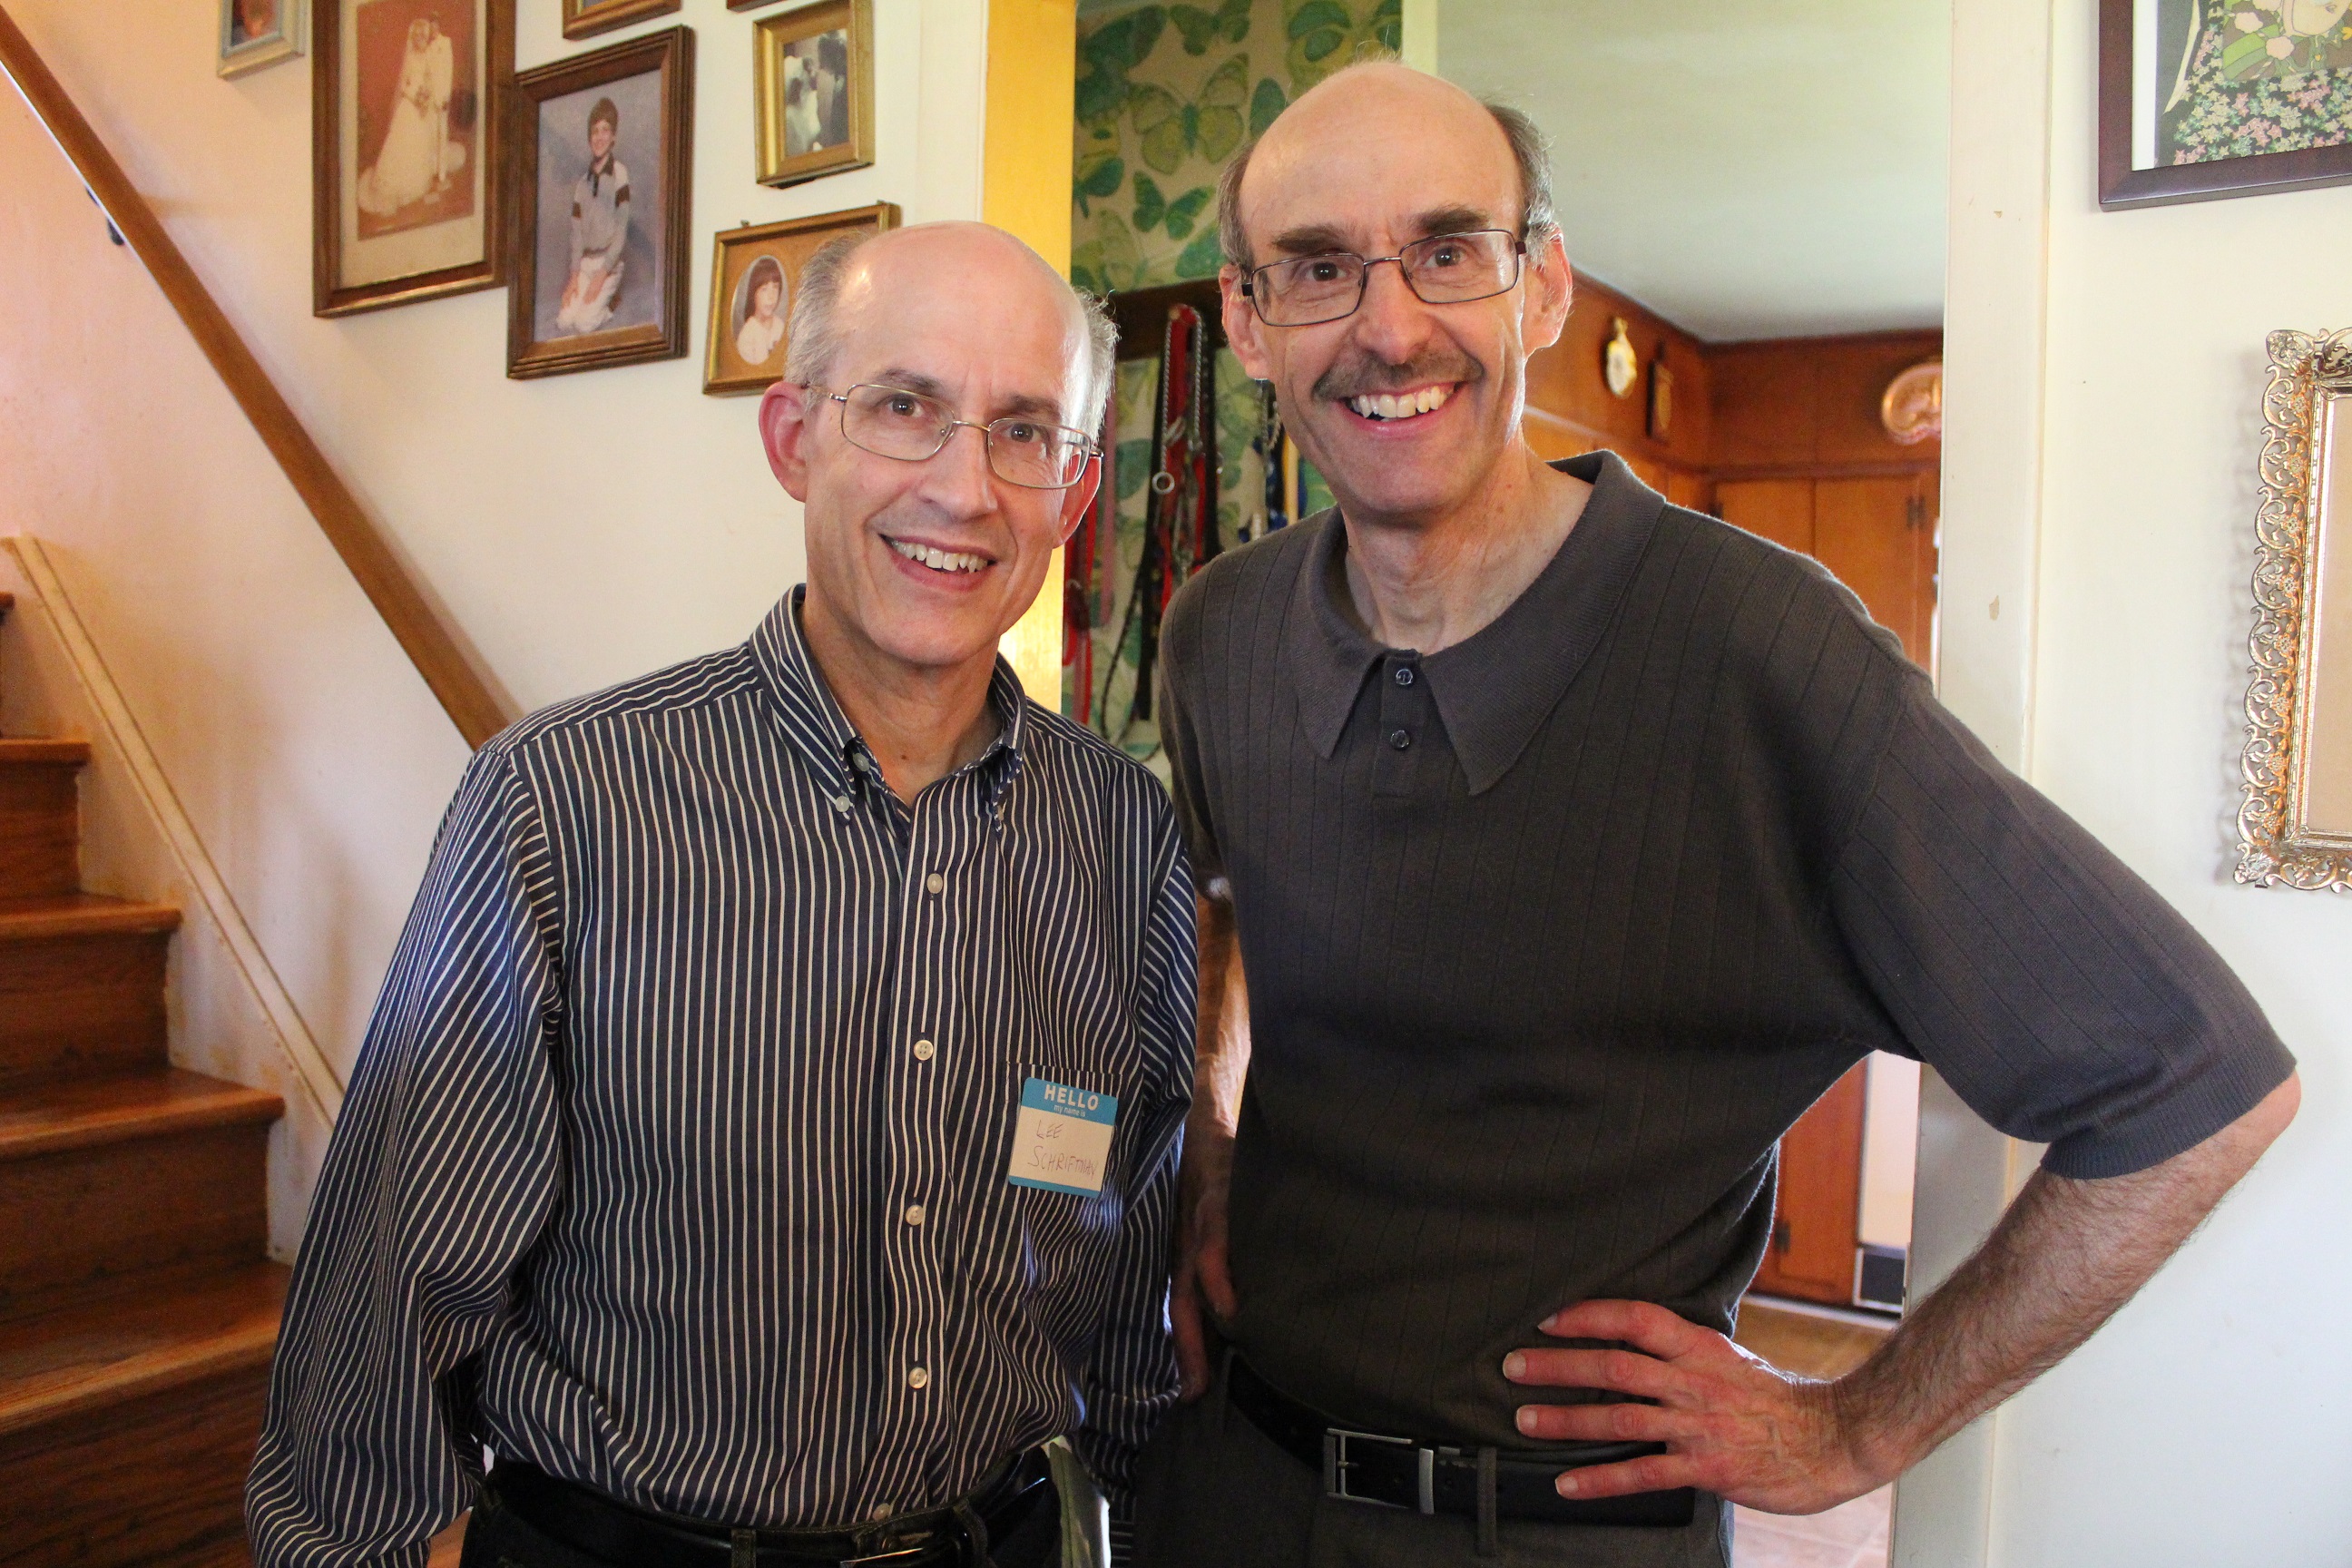 Lee Schriftman (L) with his brother, author and filmmaker Ross Schriftman (R) attend the My Million Dollar Mom launch party April 18th in Maple Glen, Pa.